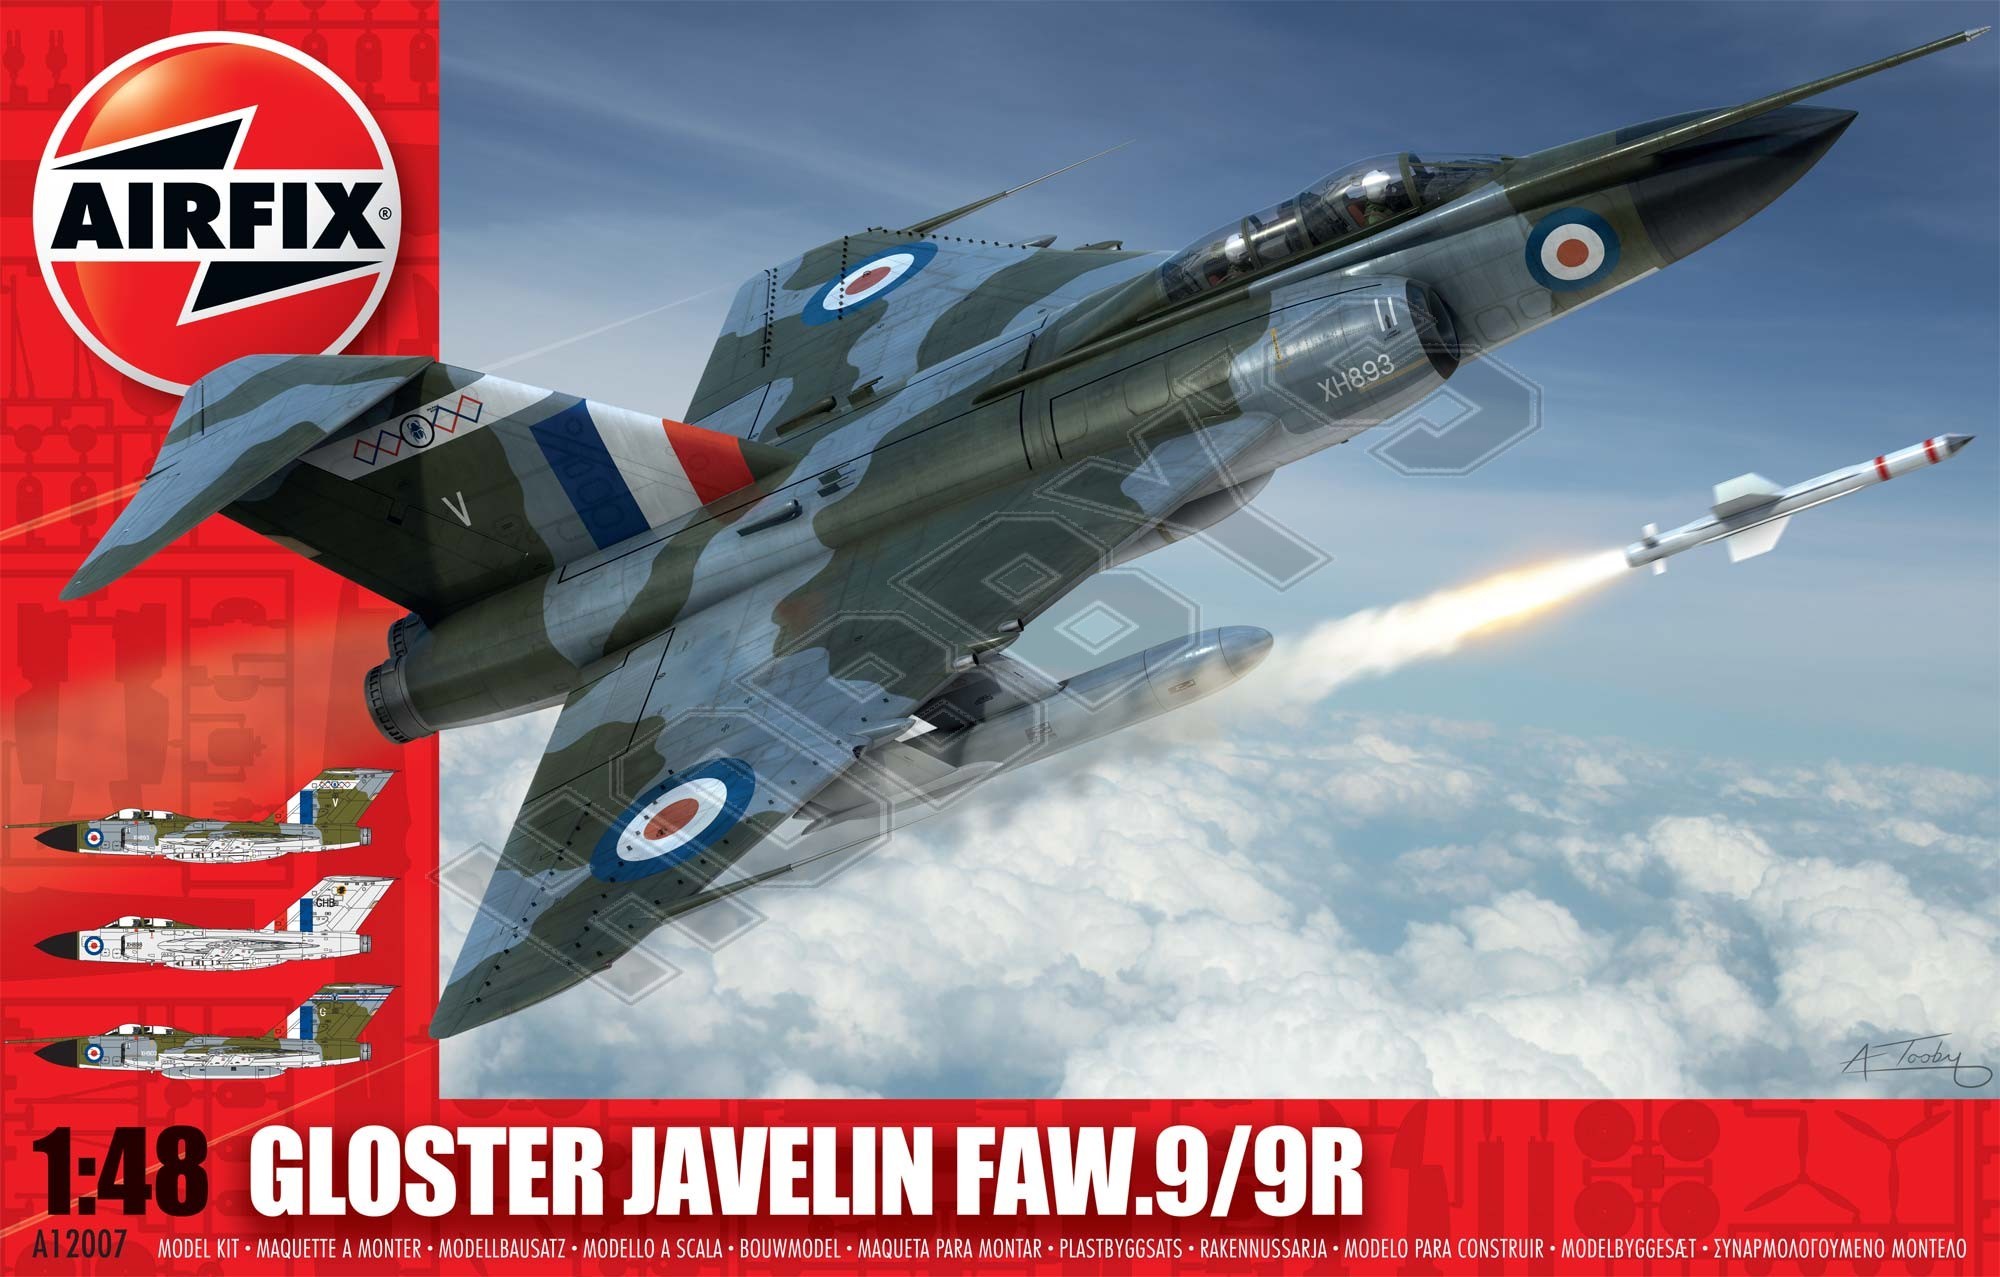 Airfix - Gloster Javelin Faw.9 AW